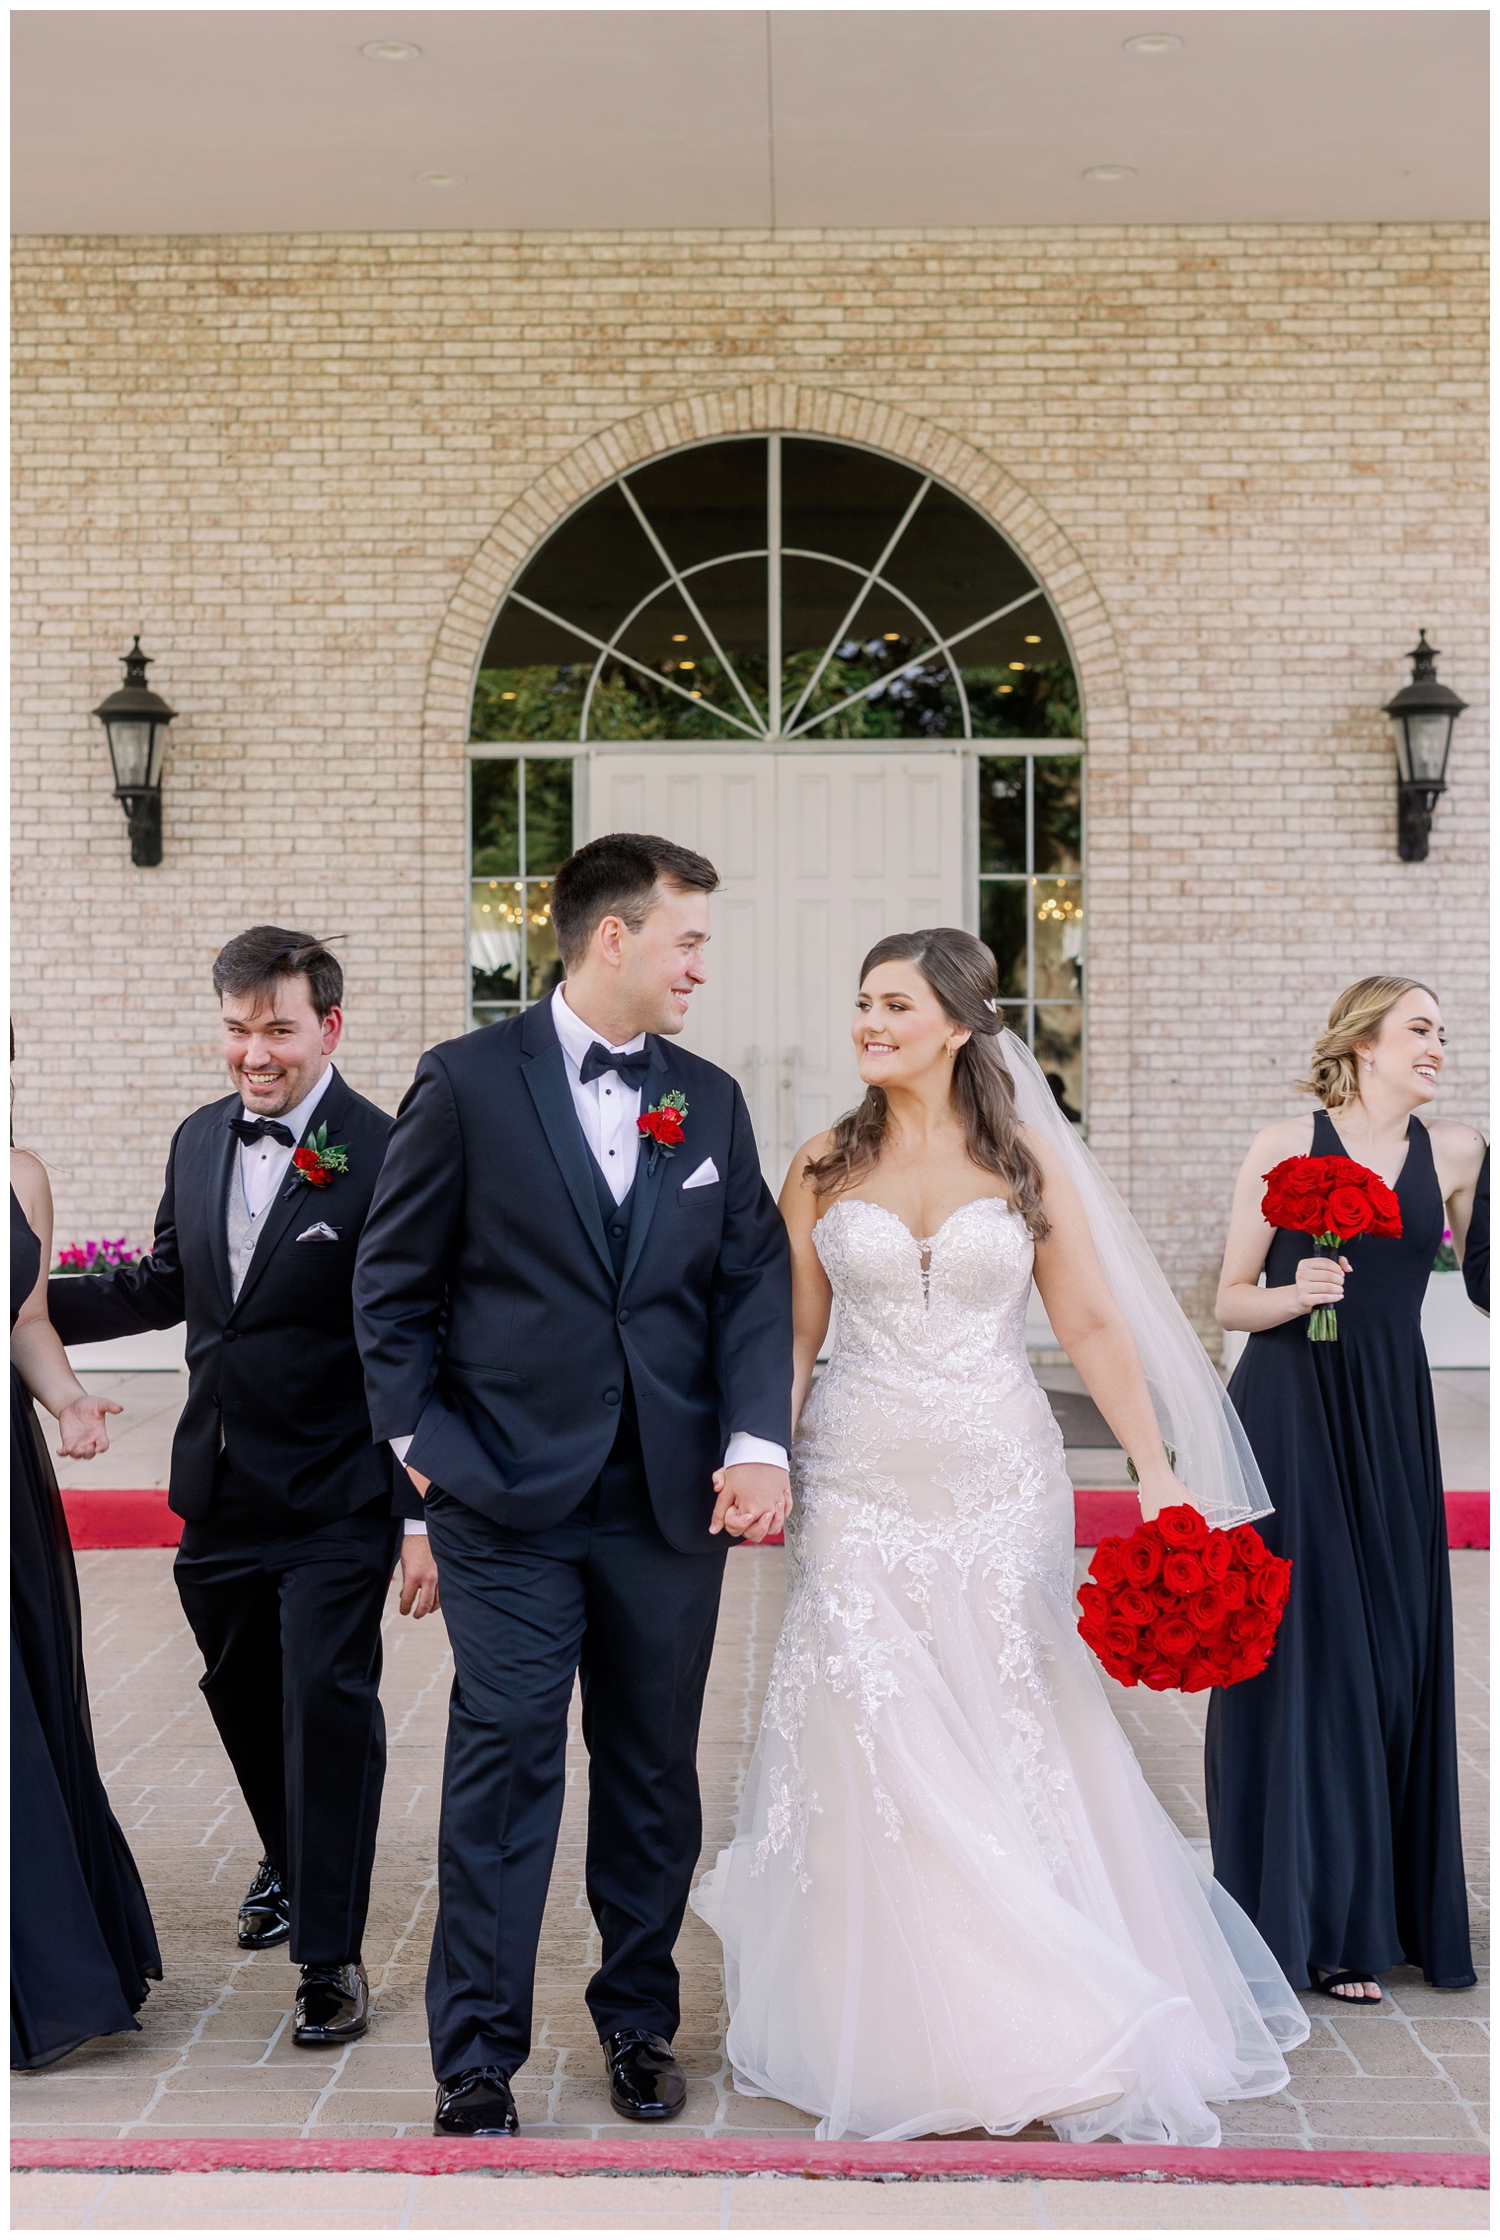 bride and groom smiling and walking holding hands in Sugar Land, Texas at Sugar Creek Country Club wedding venue